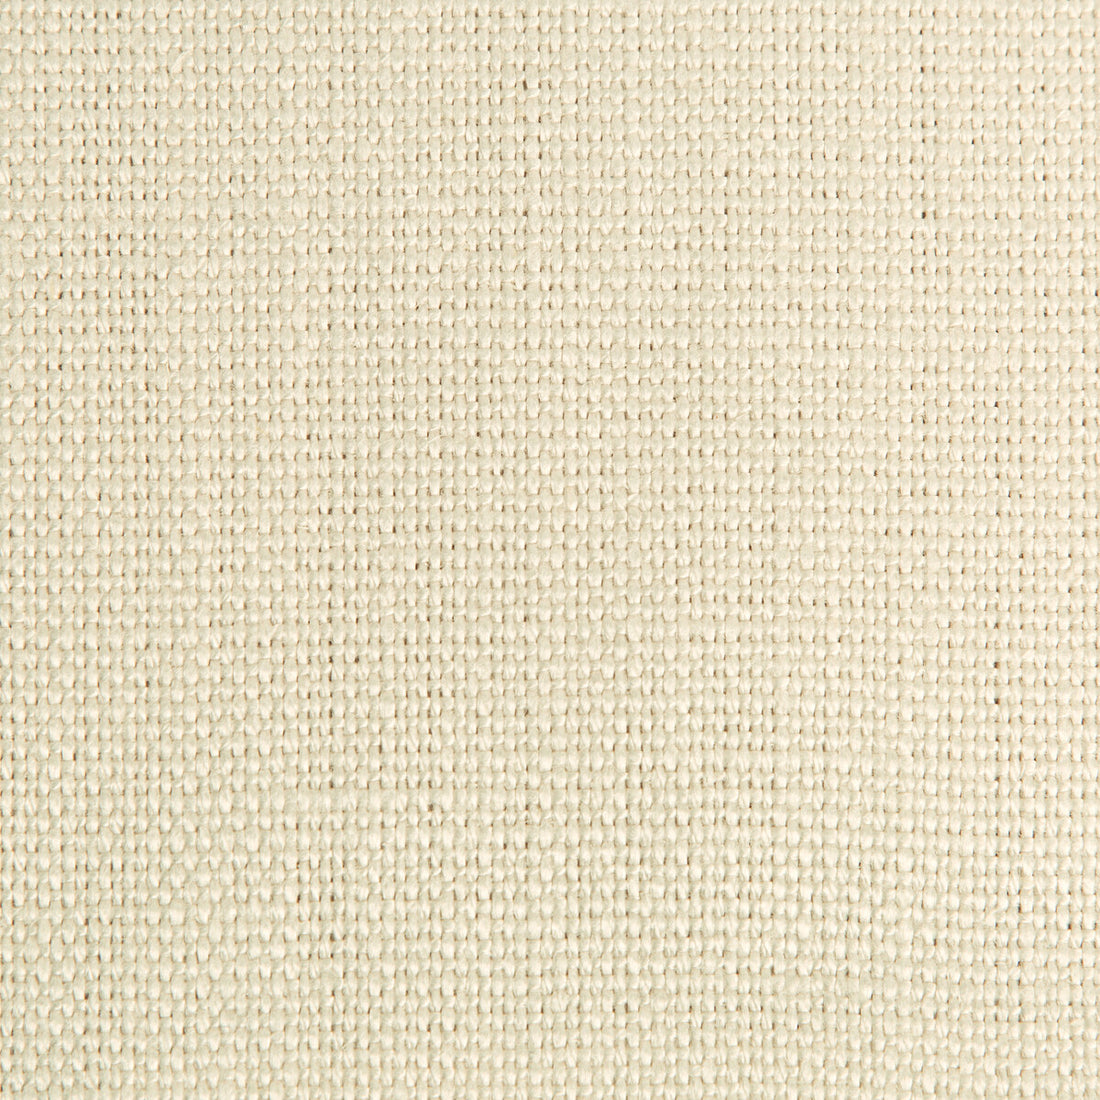 Enjoy fabric in ecru color - pattern 34643.1011.0 - by Kravet Design in the The Complete Linen IV collection